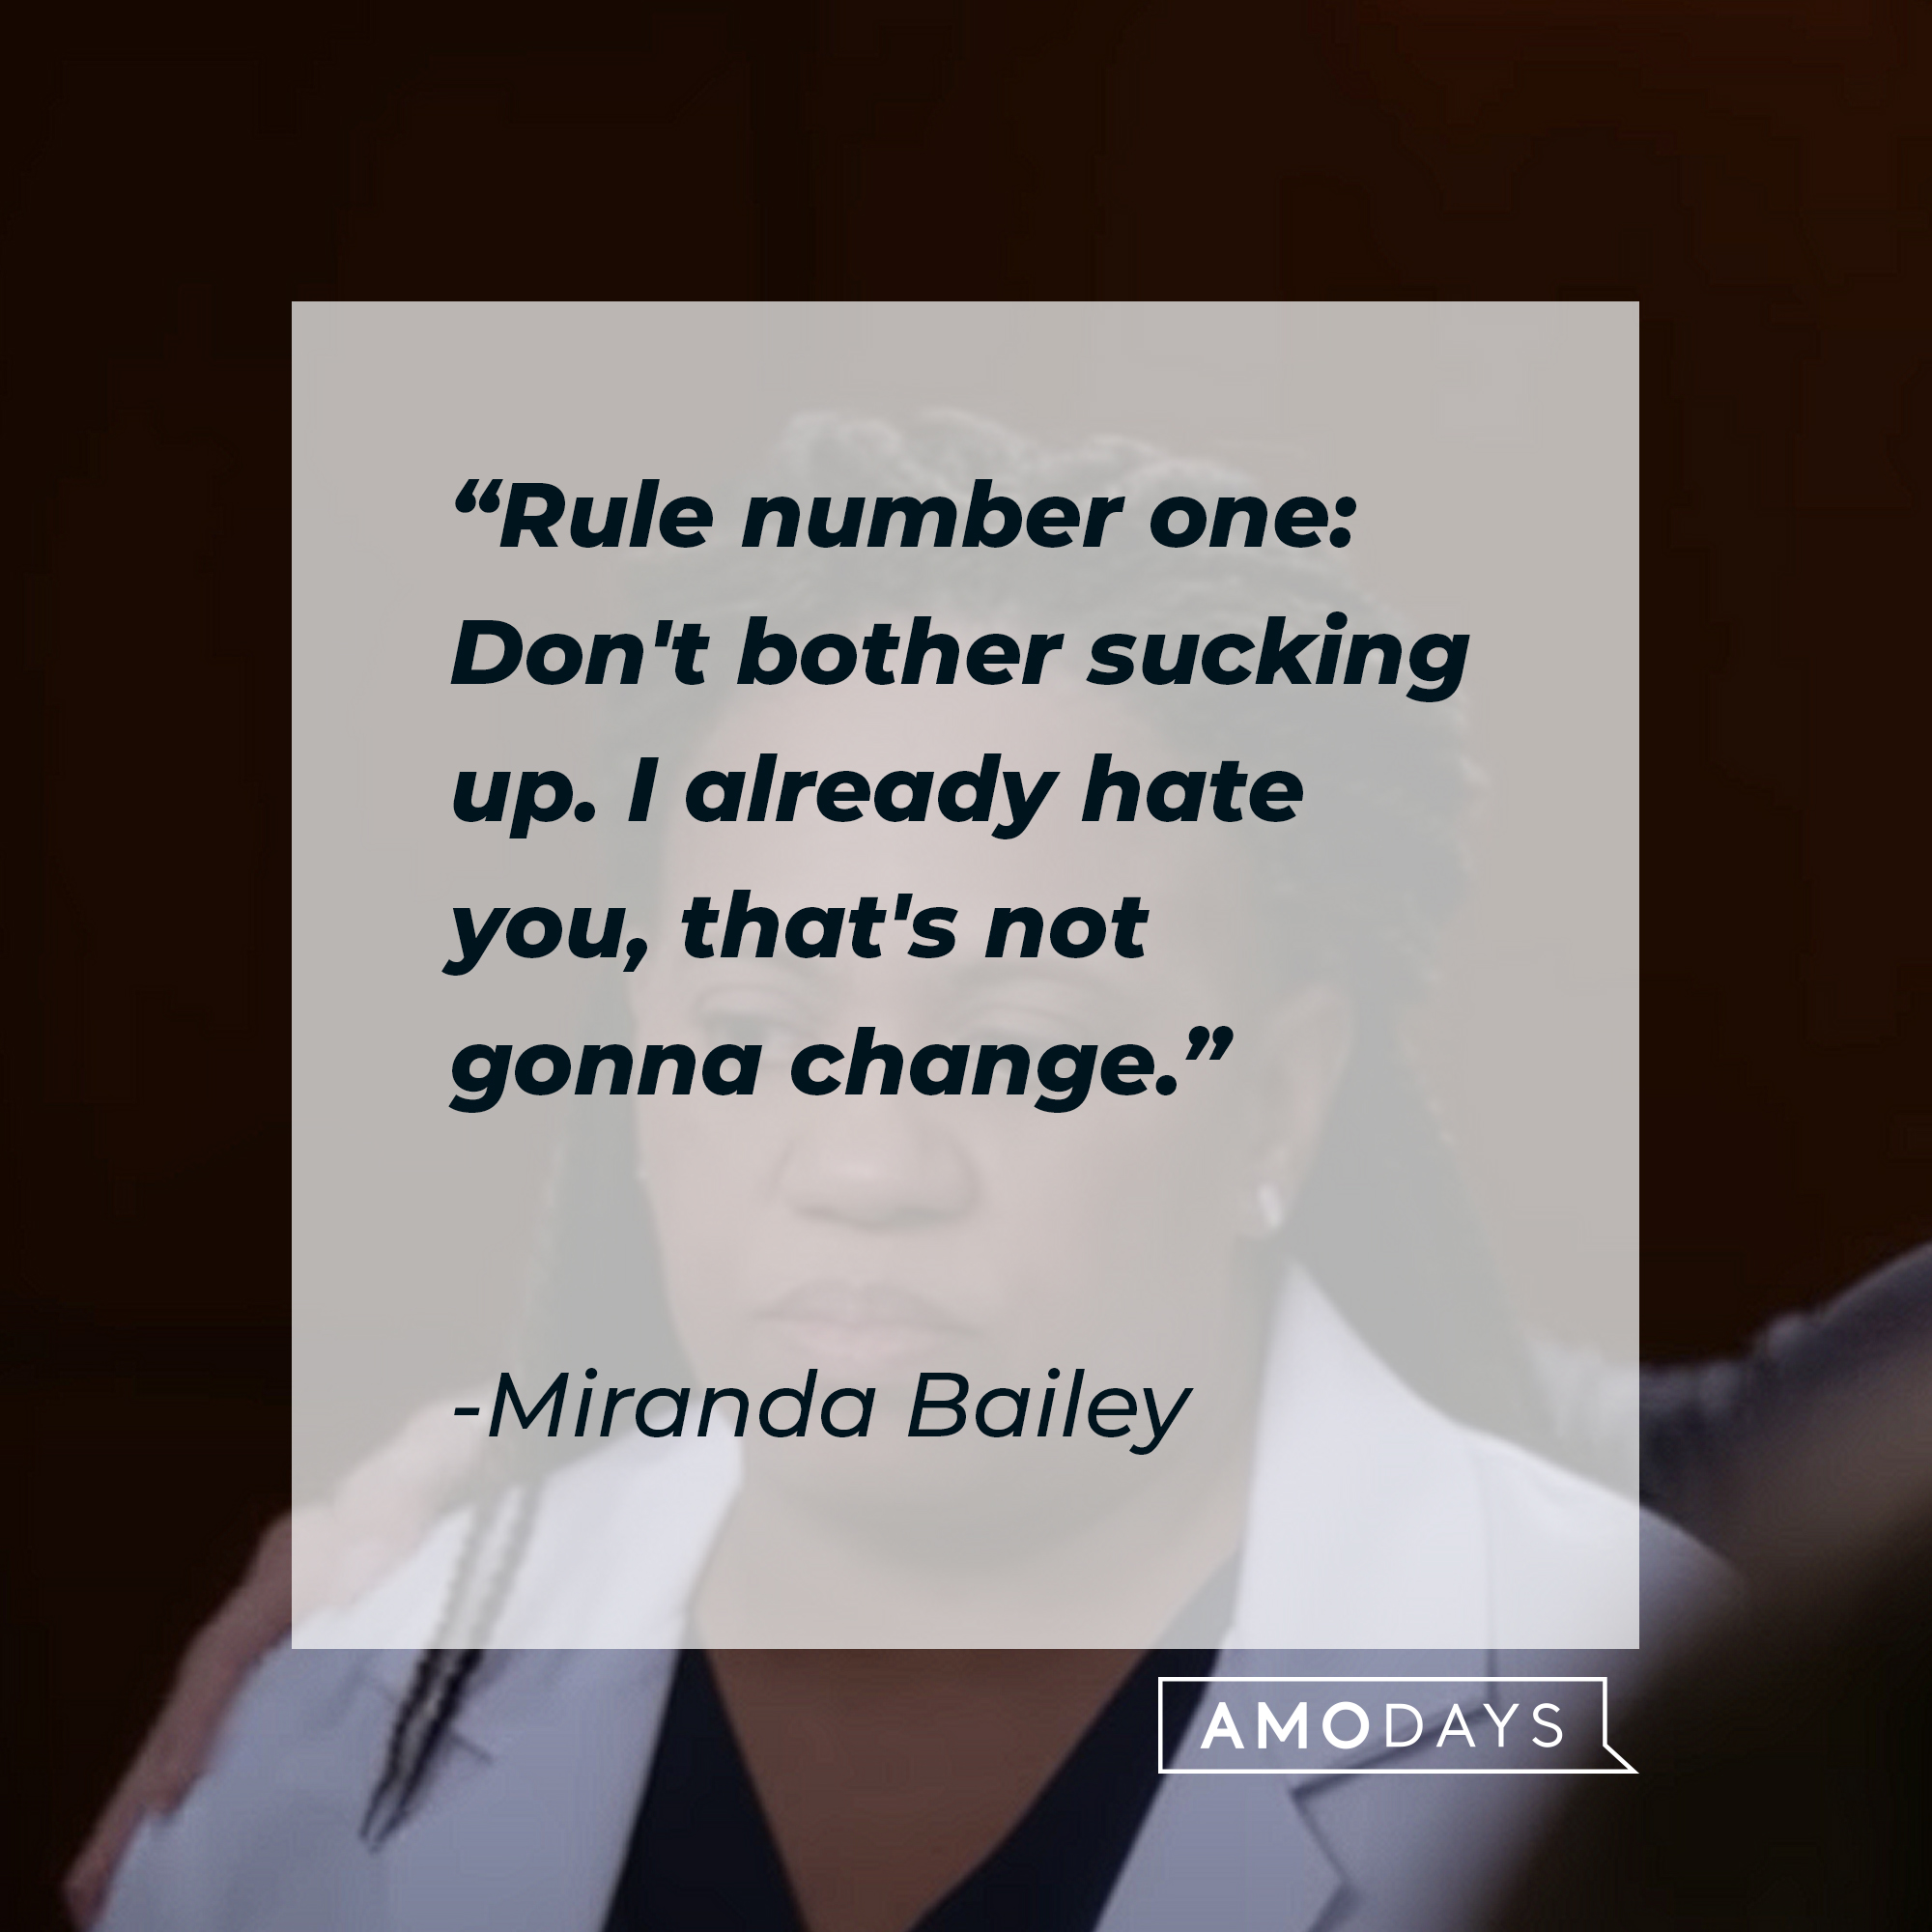 Miranda Bailey's quote: "Rule number one: Don't bother sucking up. I already hate you, that's not gonna change." | Source: youtube.com/ABCNetwork